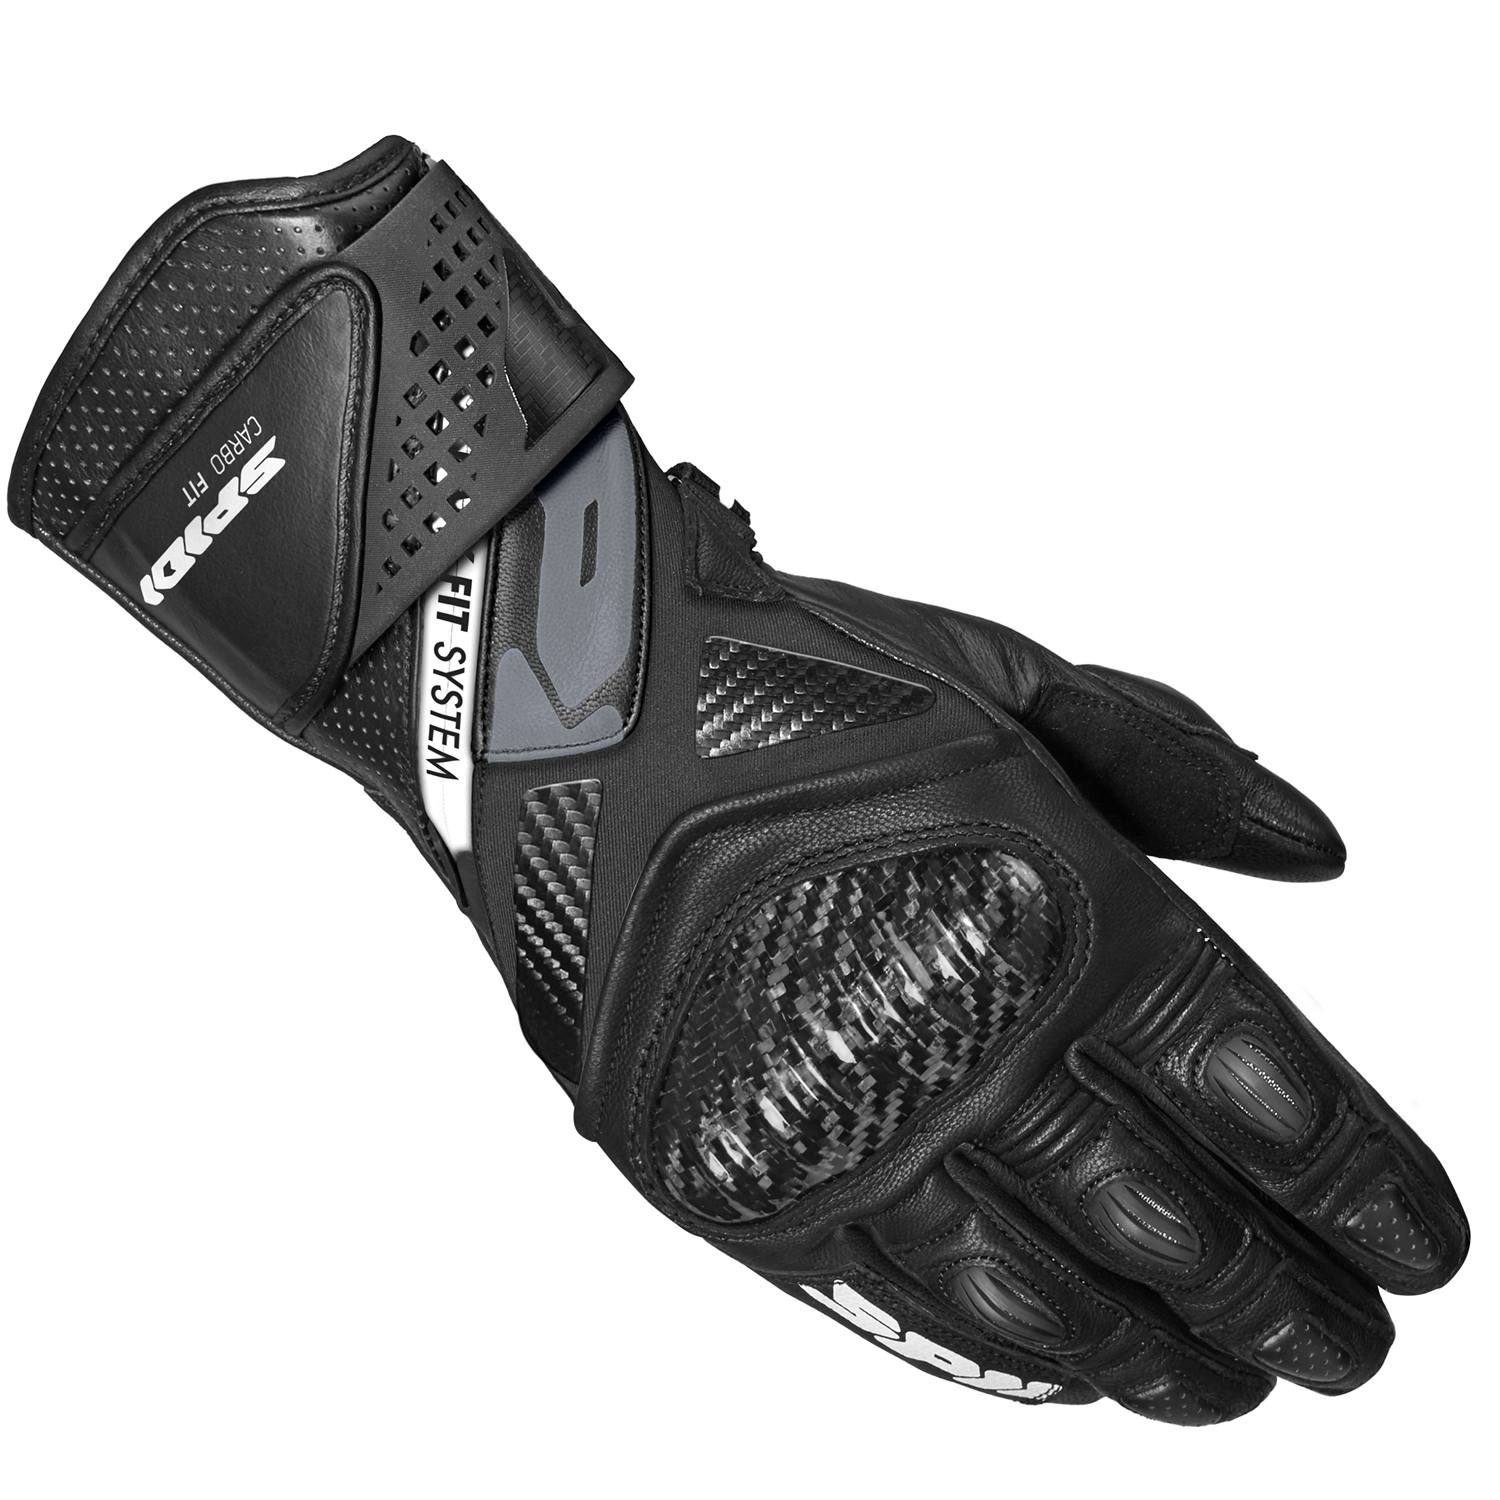 Image of Spidi Carbo Fit Gloves Black Talla 2XL